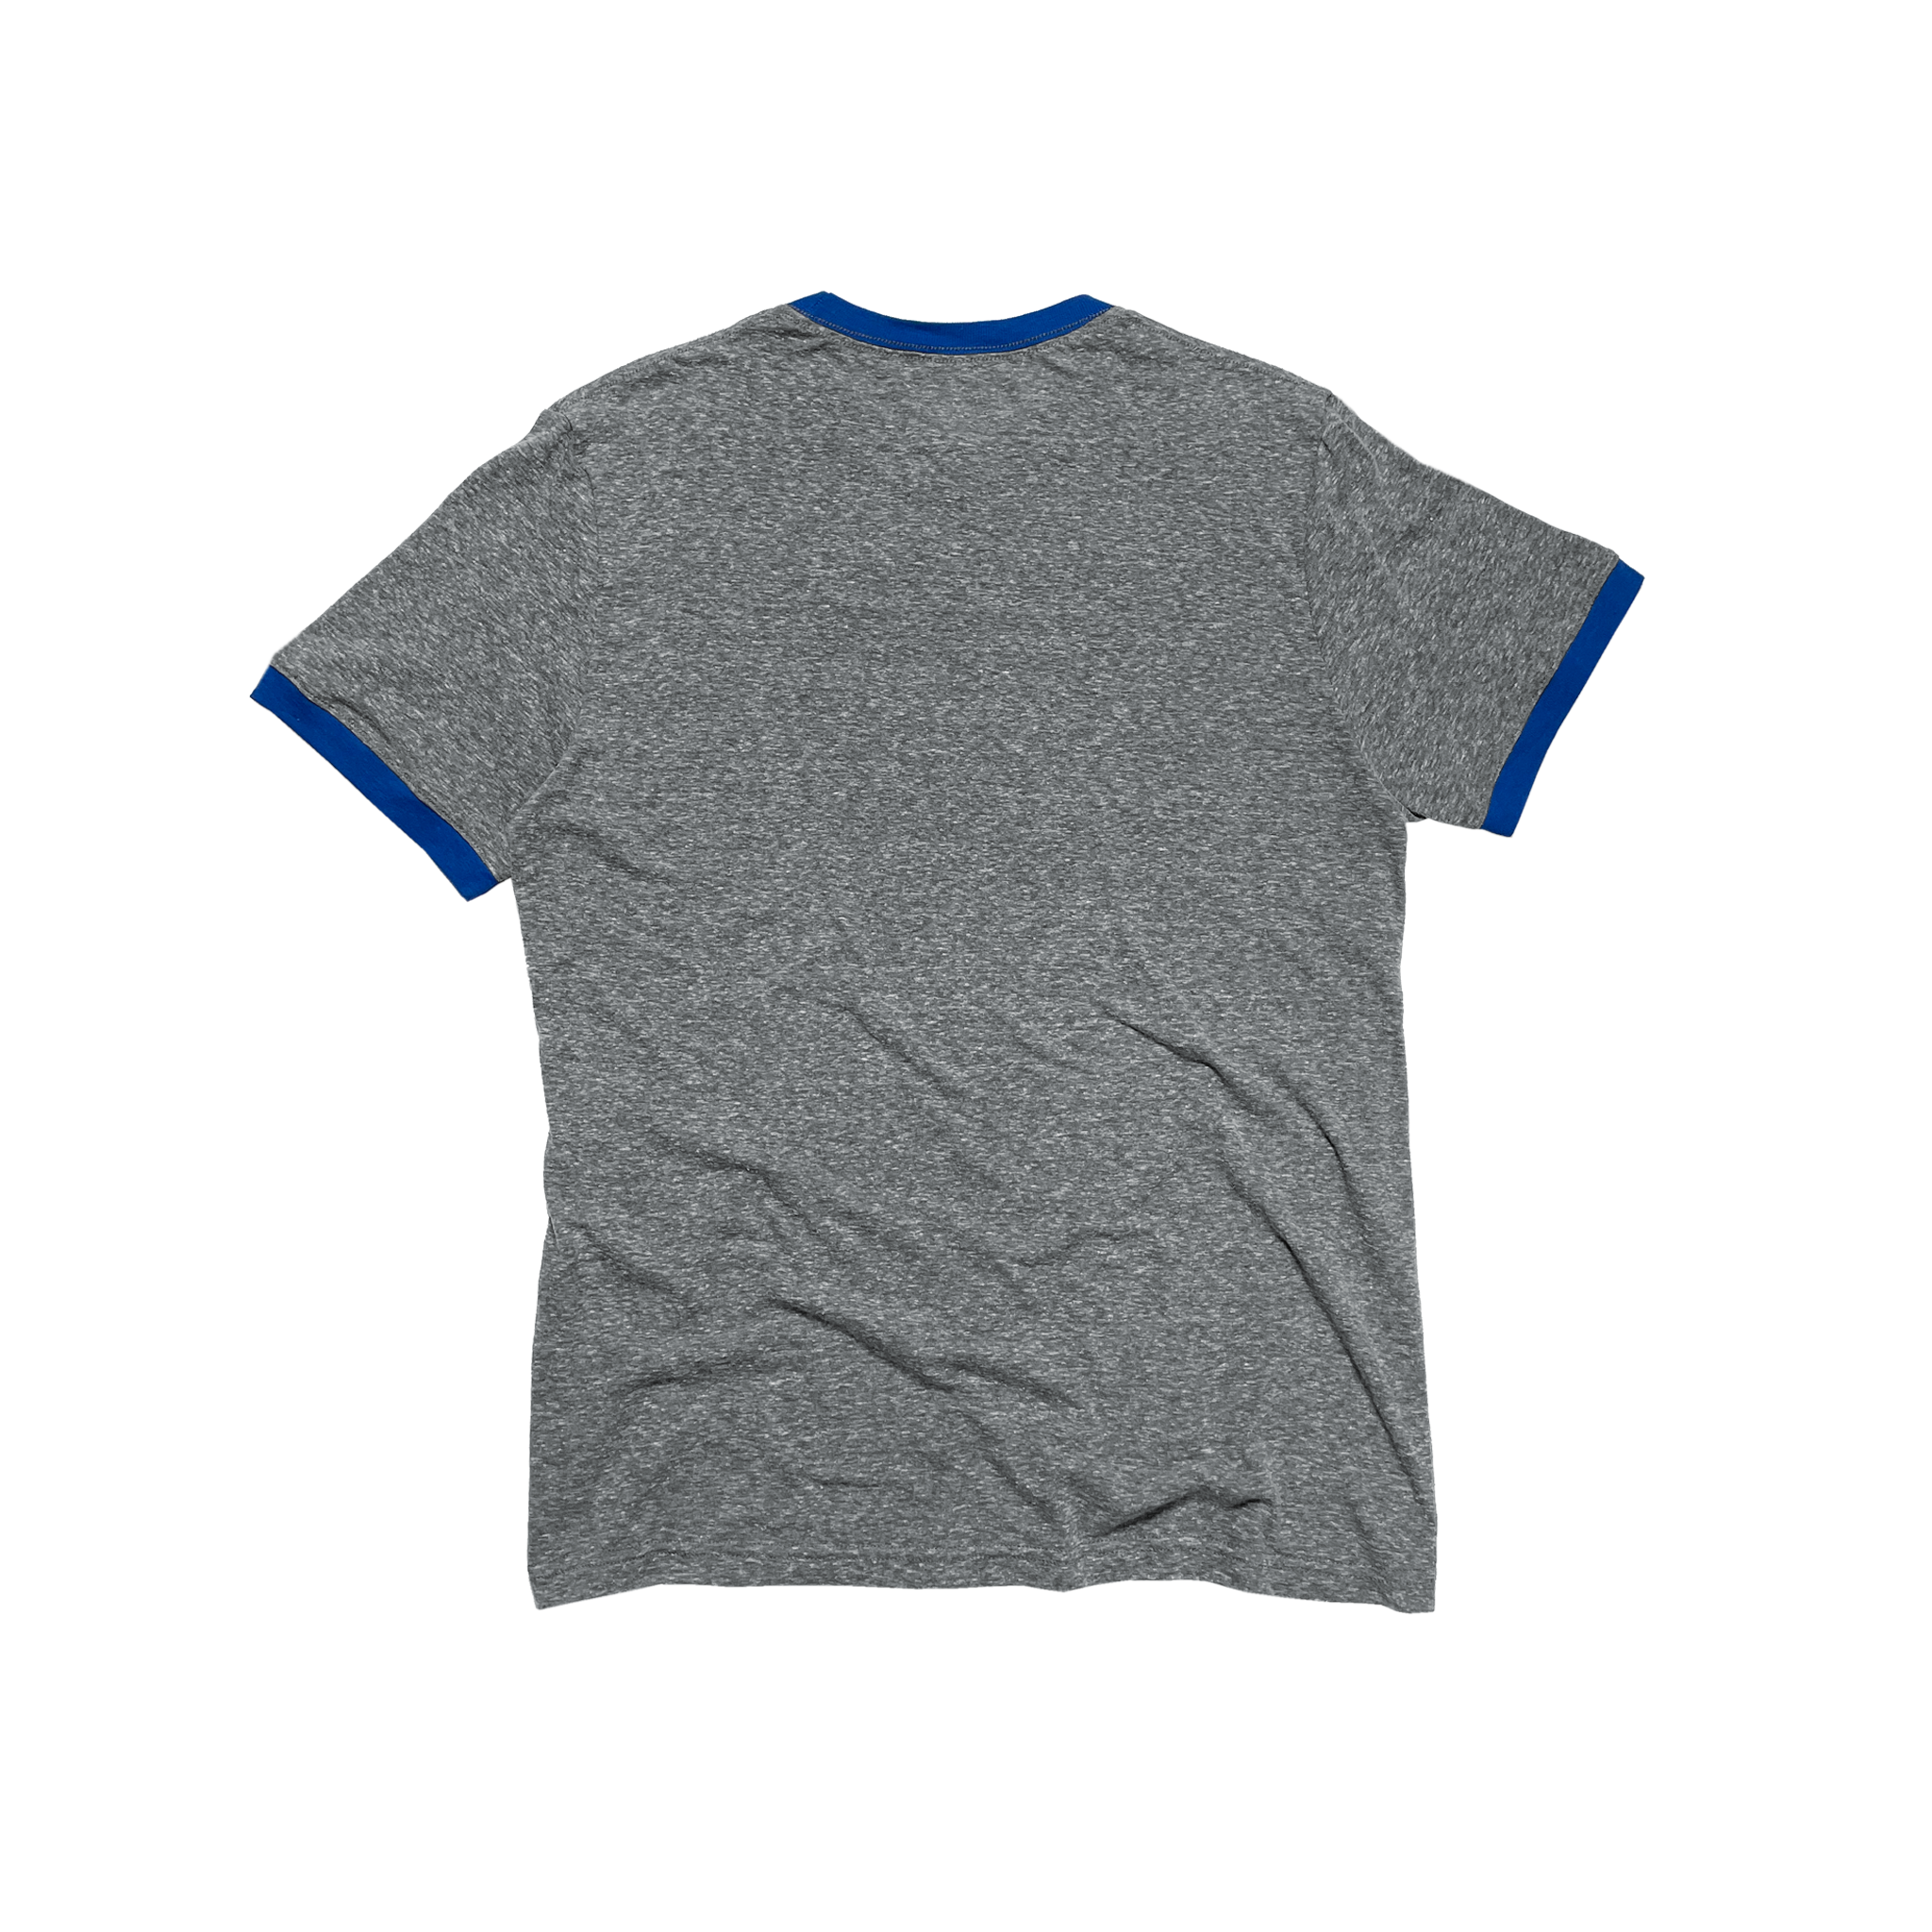 Back Flat Lay of GOEX Unisex and Men's Triblend Ringer Tee in Royal/Heather Grey